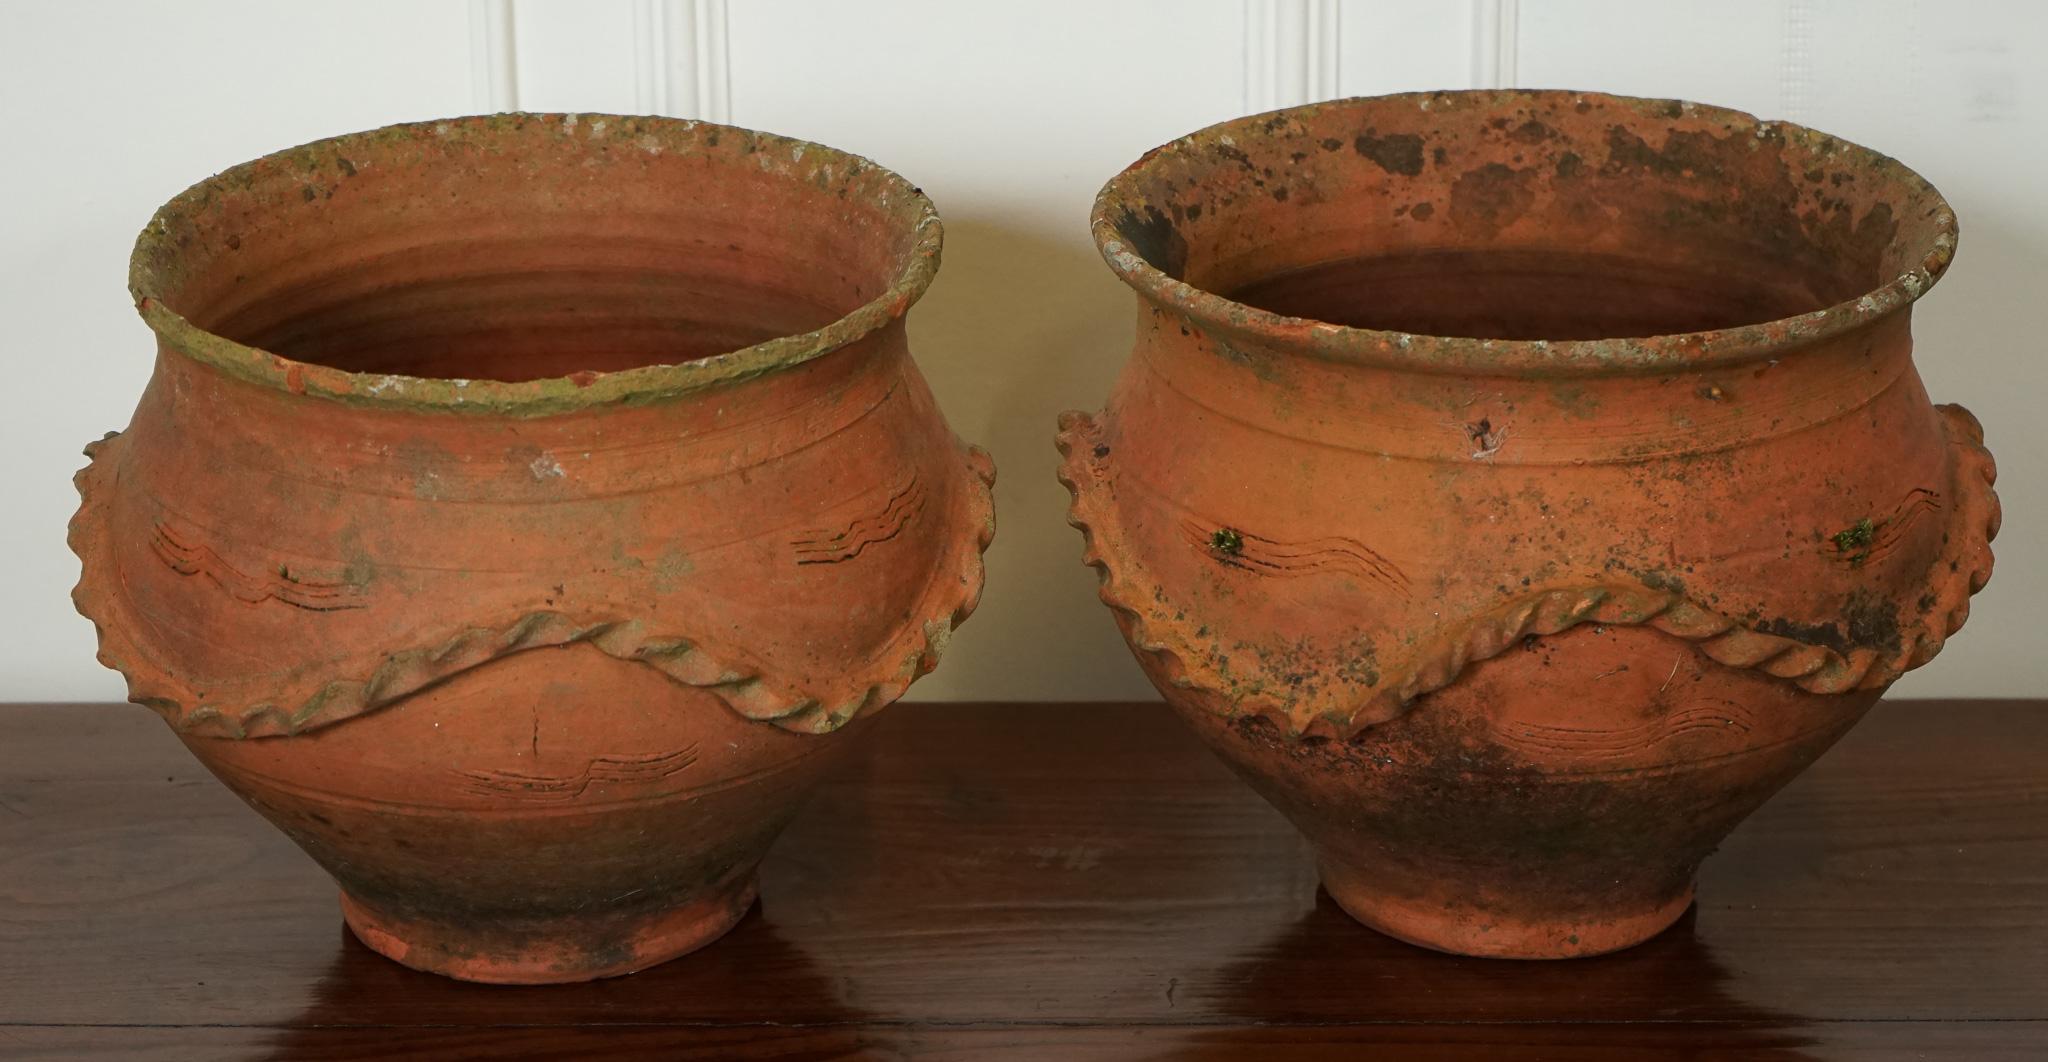 
We are delighted to offer for sale this A Pair Of Early 20th-century Terracotta Planter Pots.

 Exudes A Rustic charm and vintage appeal reminiscent of the era. These planters showcase the traditional craftsmanship and earthy warmth that terracotta